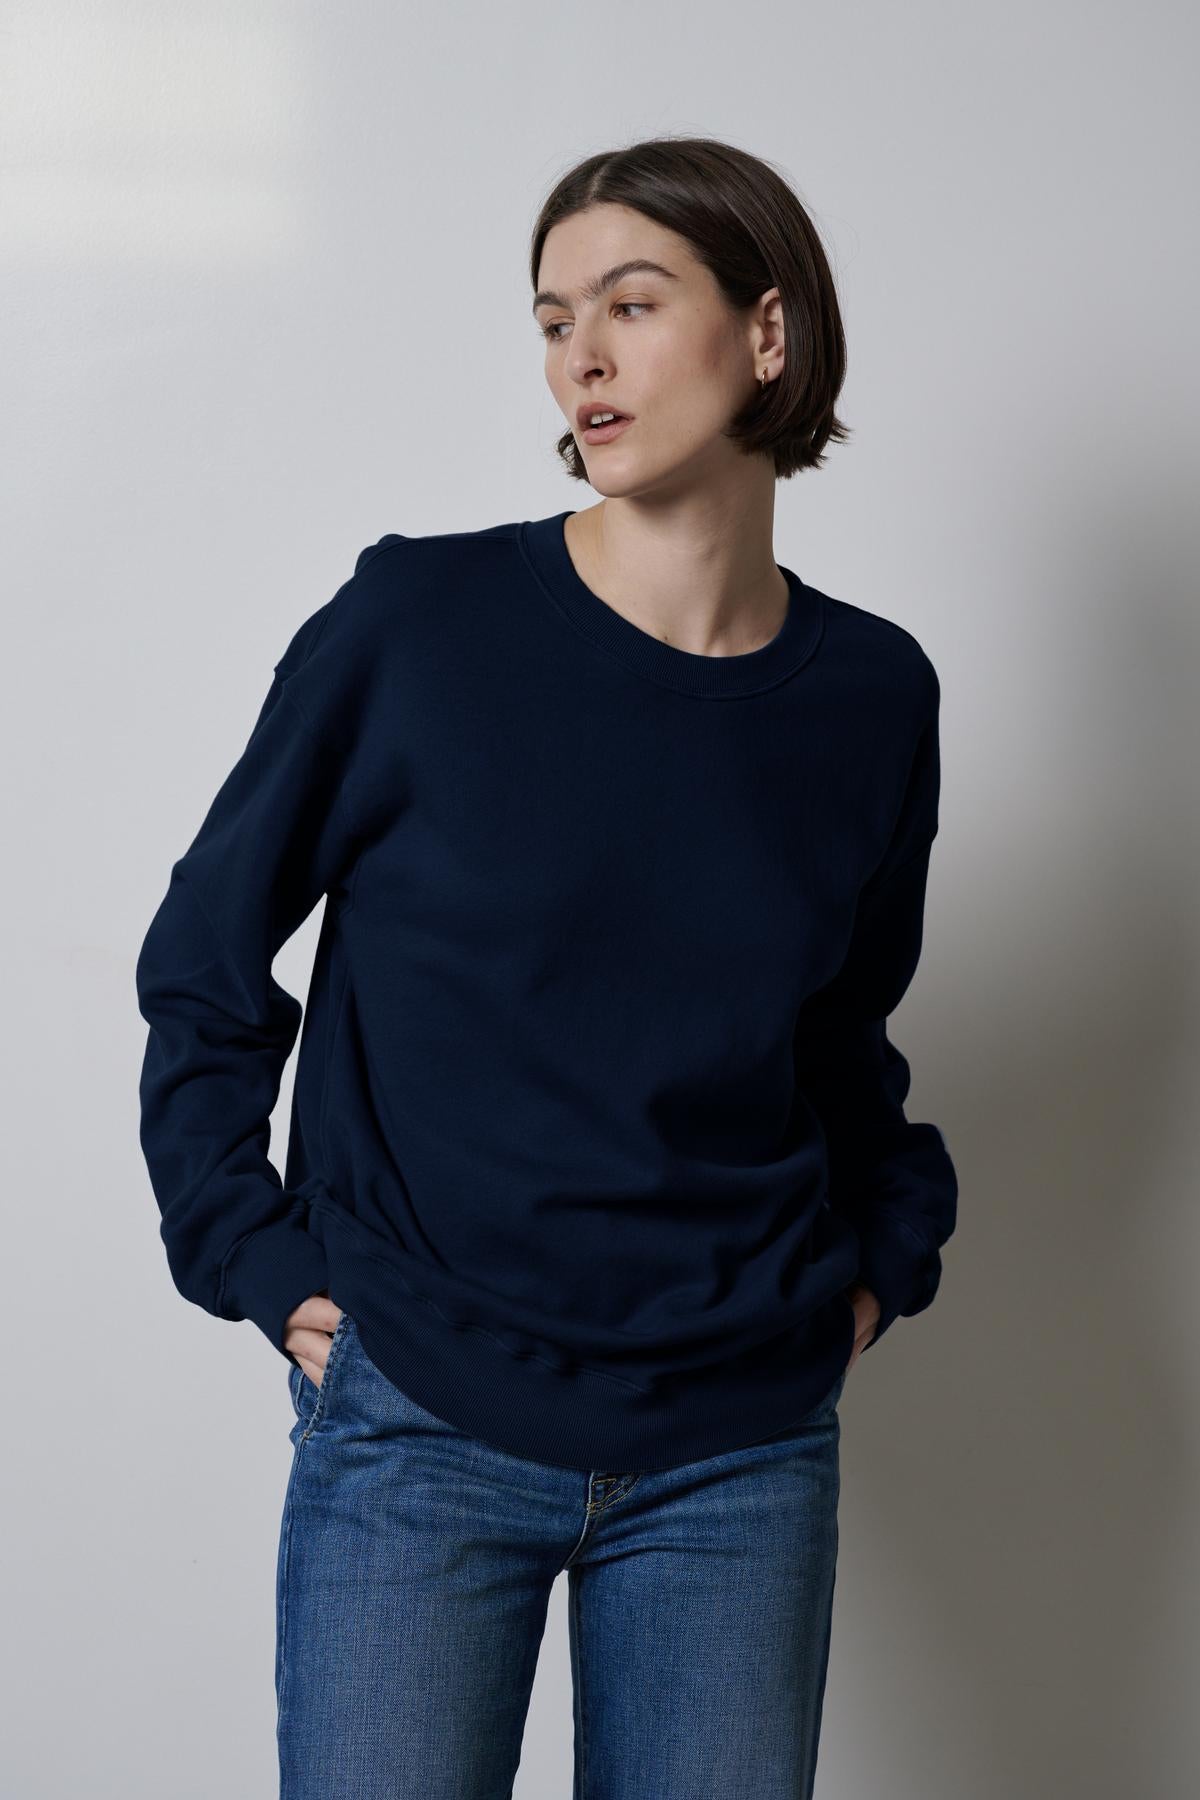 The model is wearing a Velvet by Jenny Graham Abbot sweatshirt, highlighting its styling versatility.-35495979450561